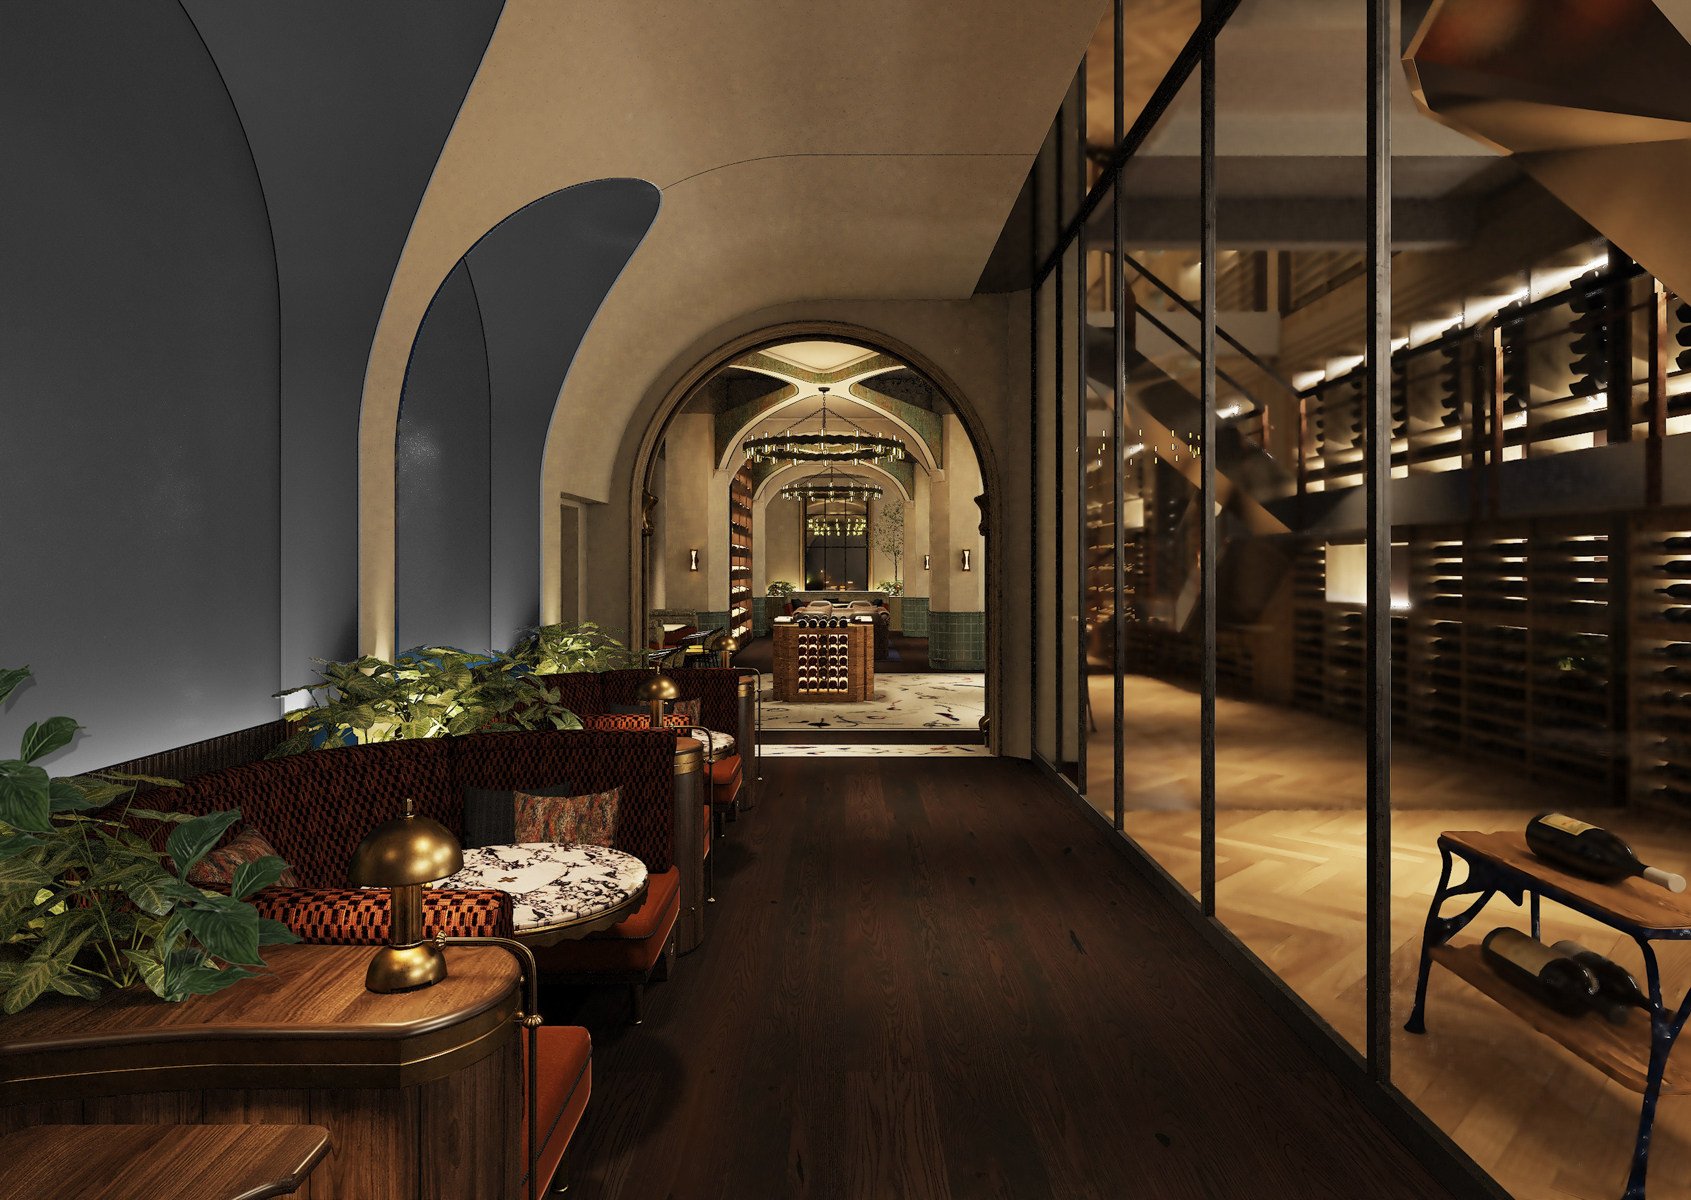 A section of the wine cellar visible in a rendering of the future Club Bâtard in Pedder Building, Central, Hong Kong. The members-only club will charge joining fees of up to US$19,200 per head. Photo: Club Batard